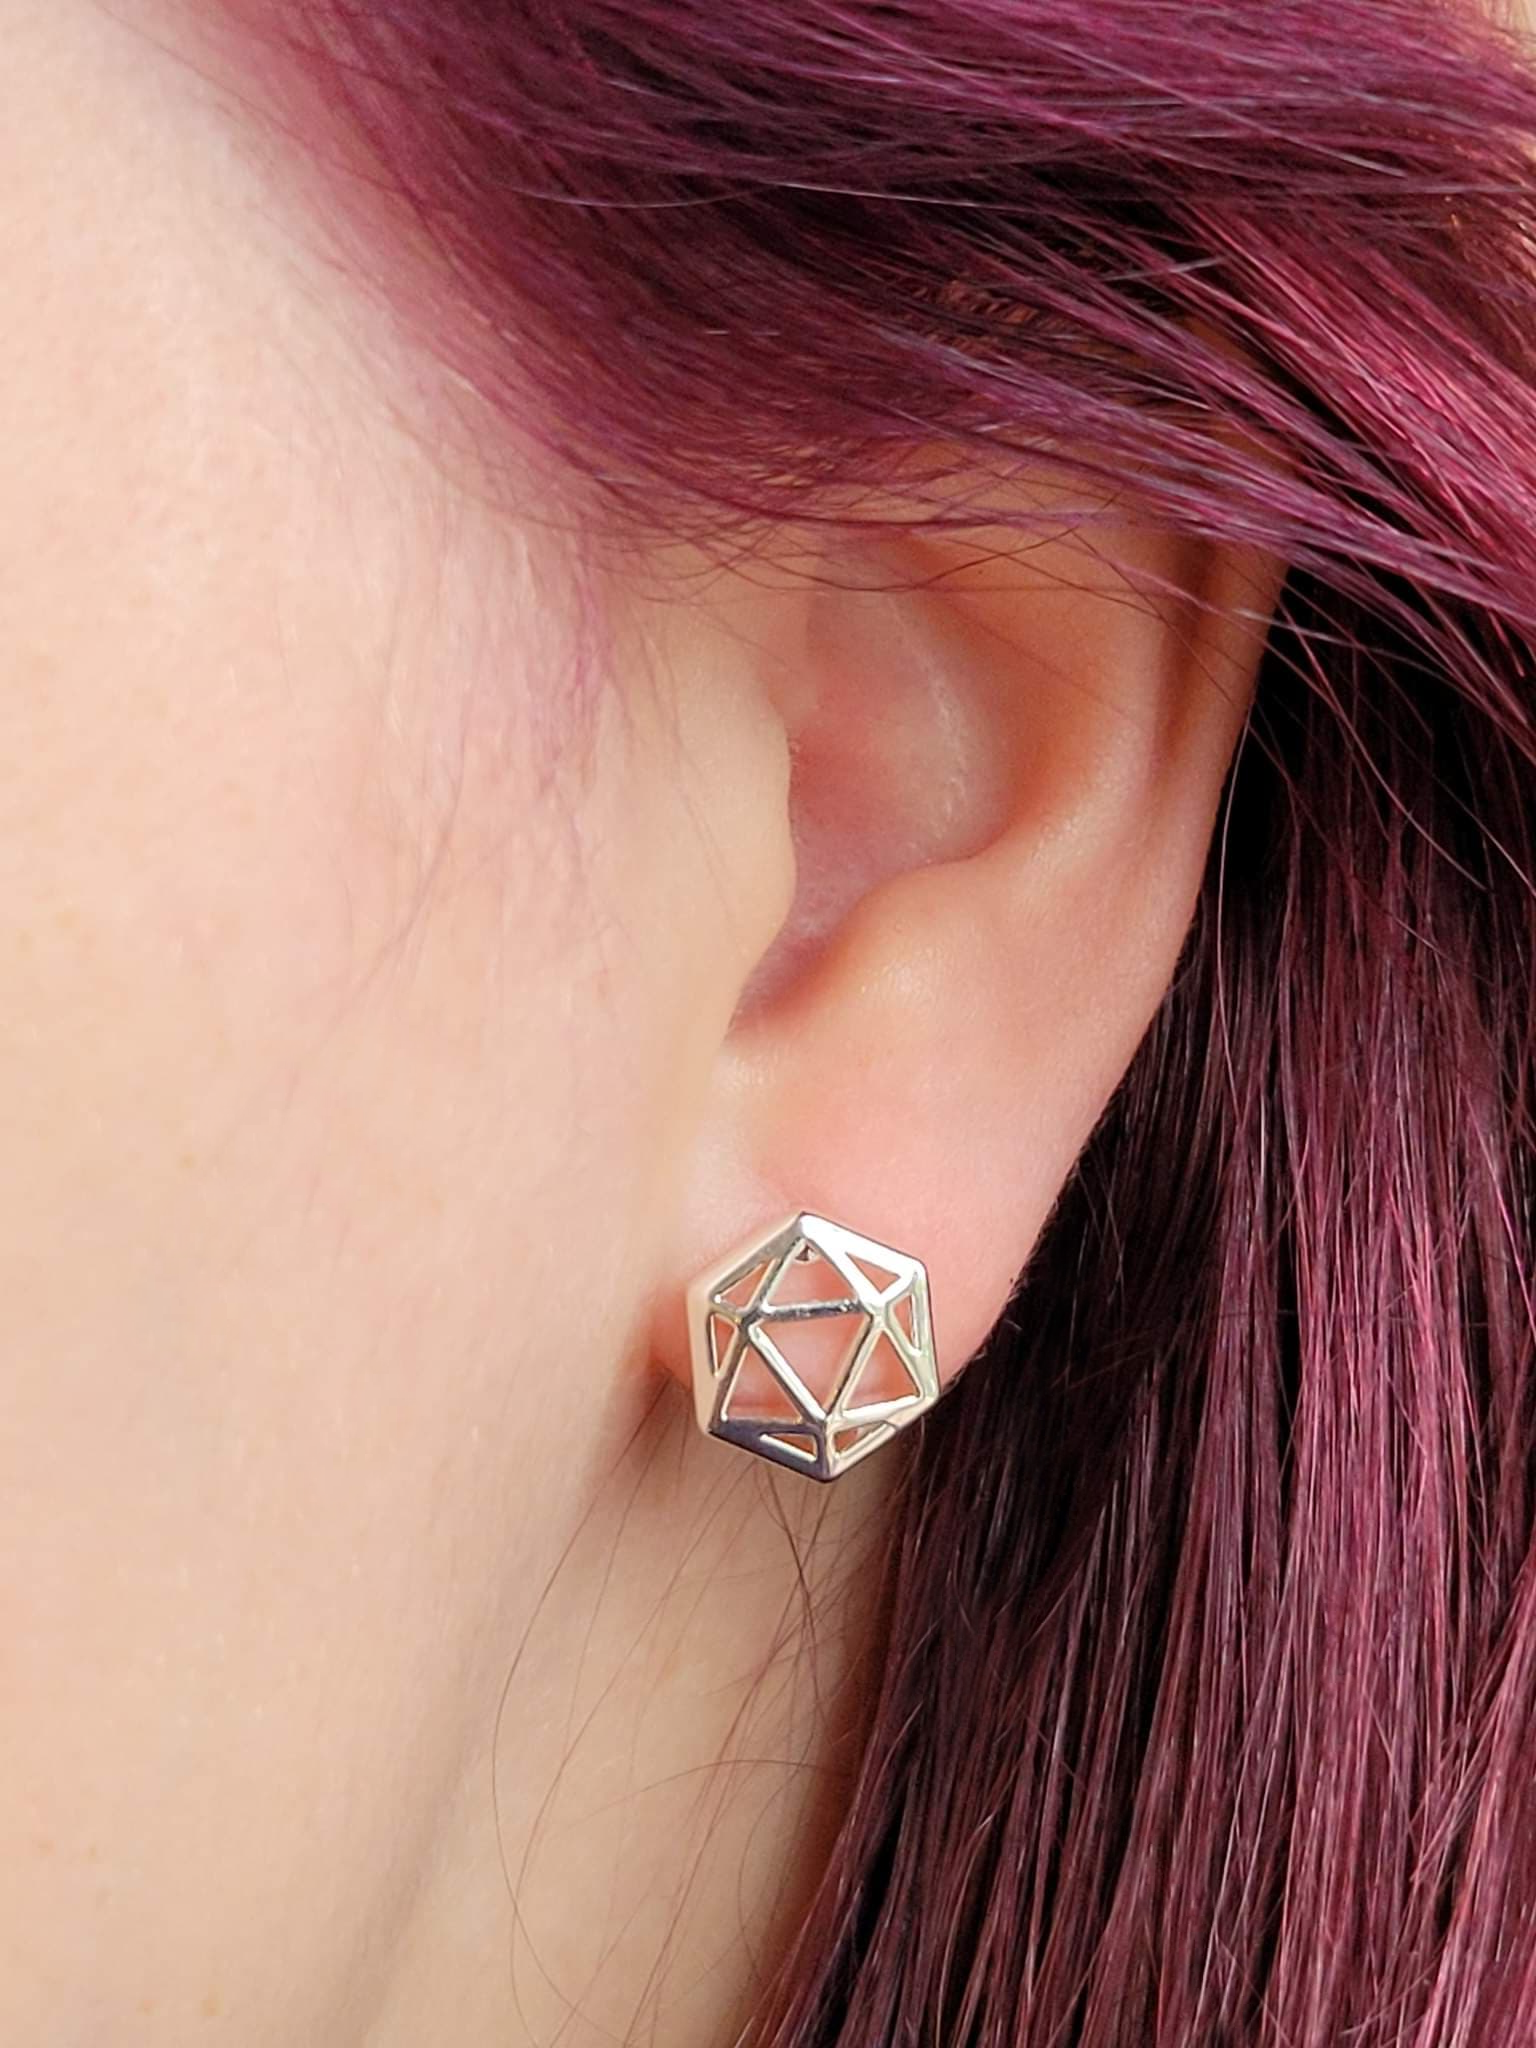 D20 Dice stud earrings gold - The Wizard's Vault